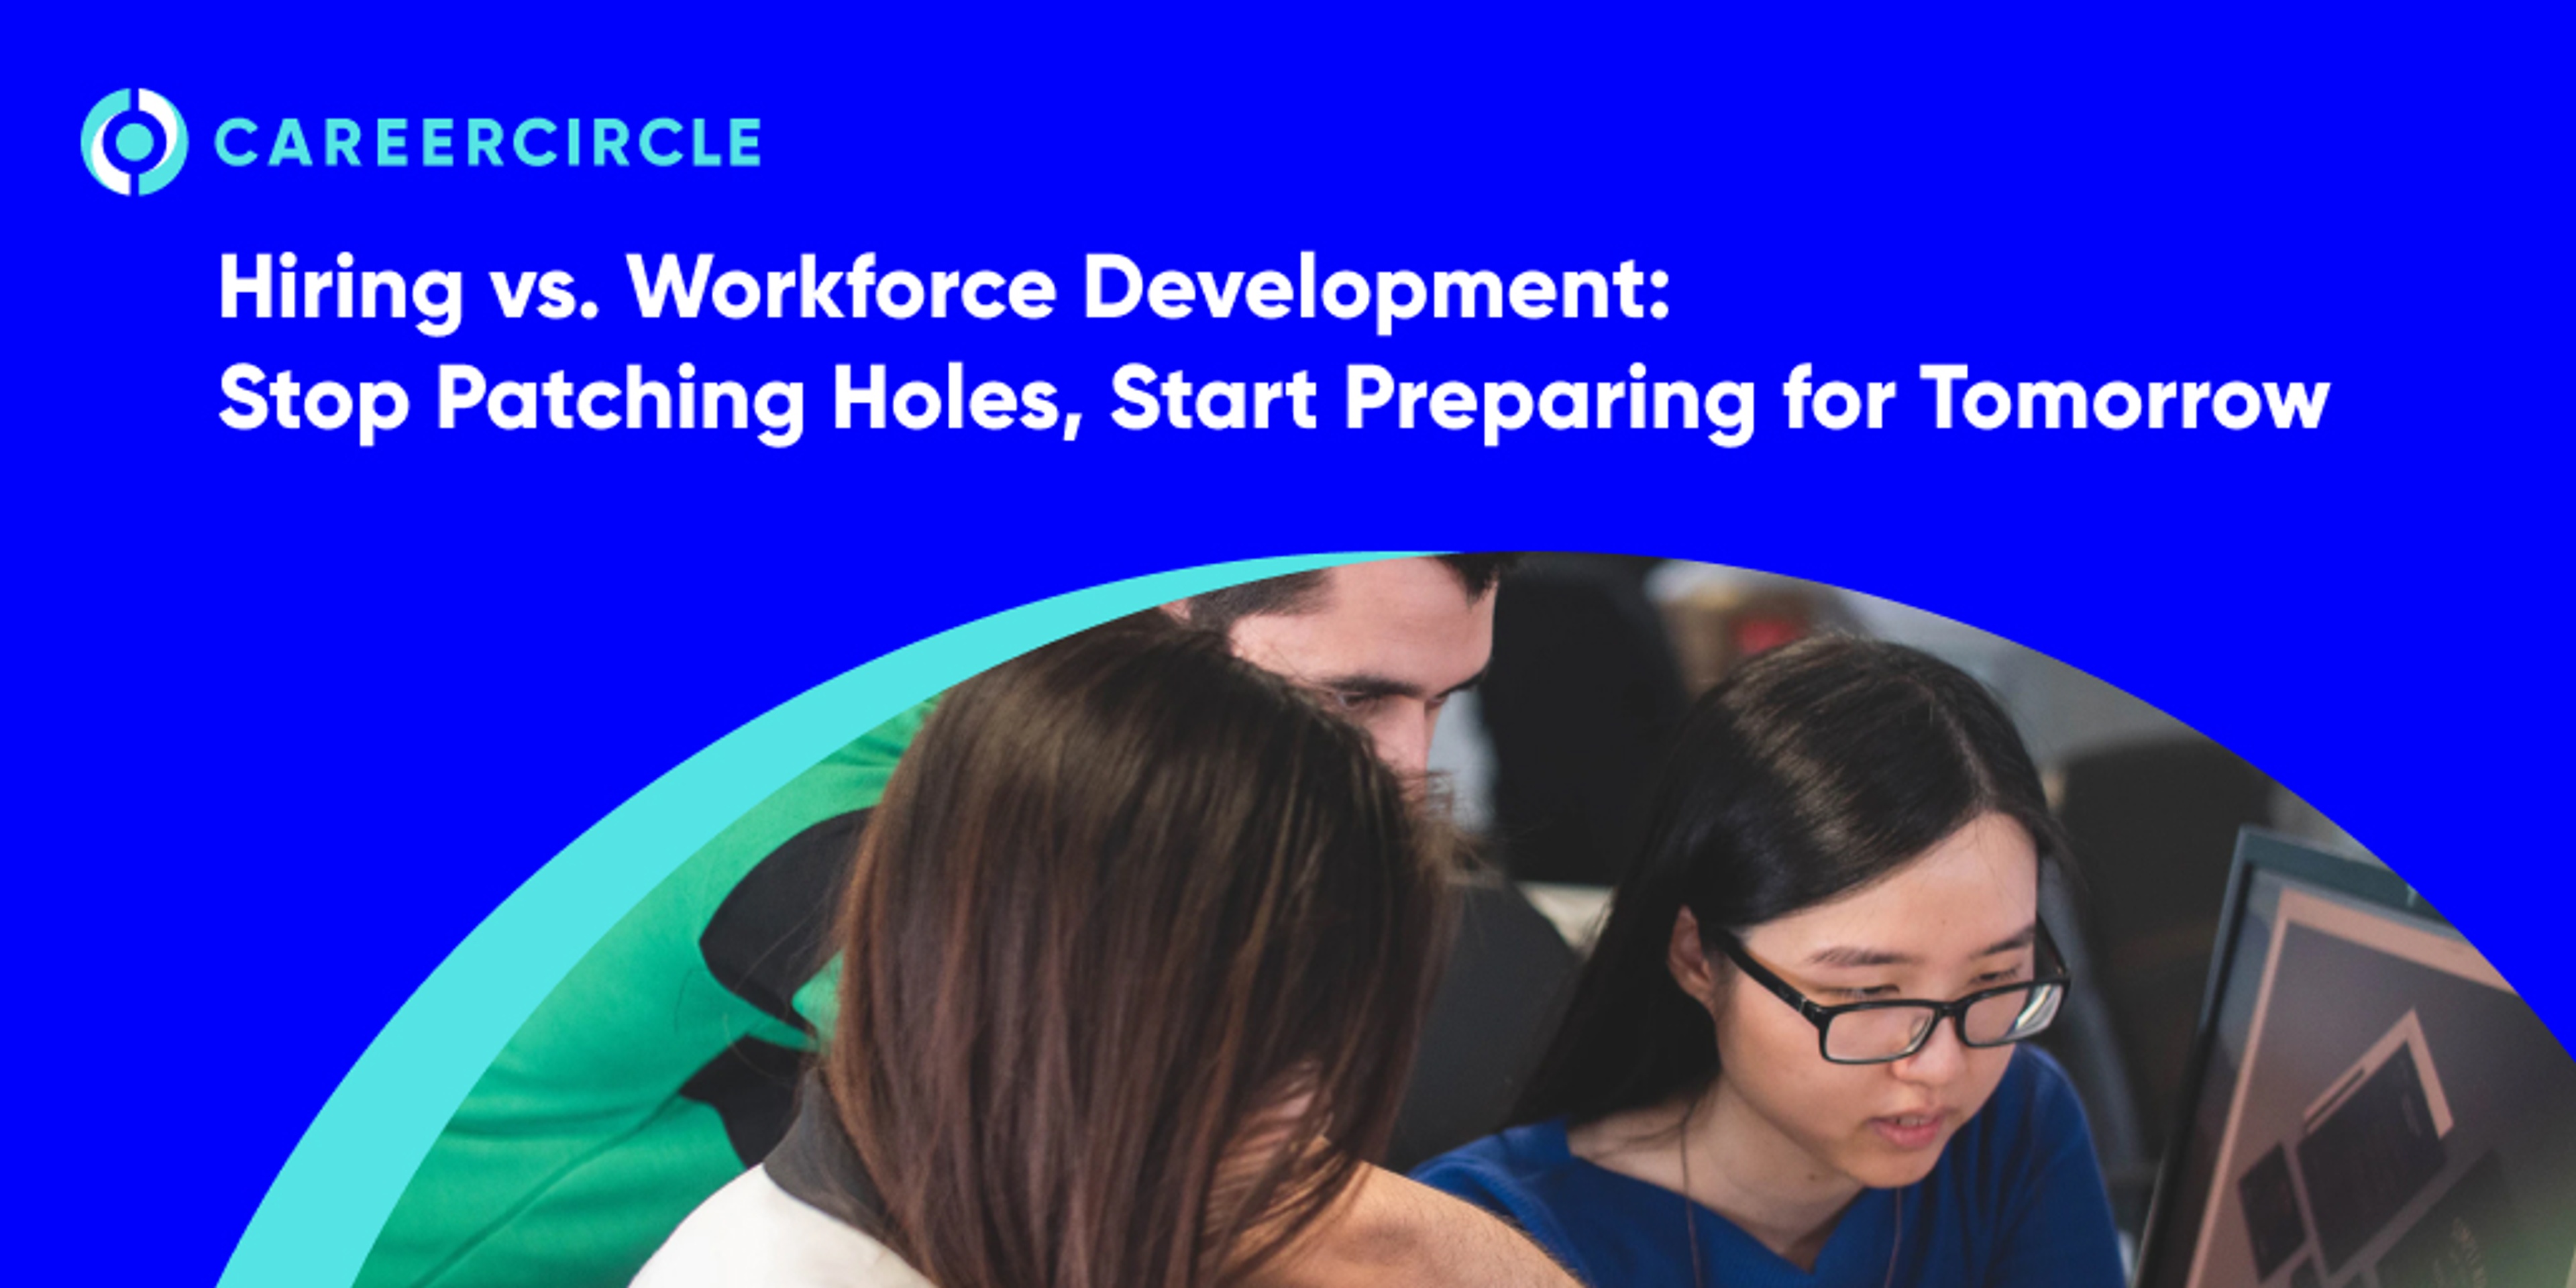 CareerCircle - "Hiring vs. Workforce Development: Stop Patching Holes, Start Preparing for Tomorrow" with an image of three people looking at a computer.